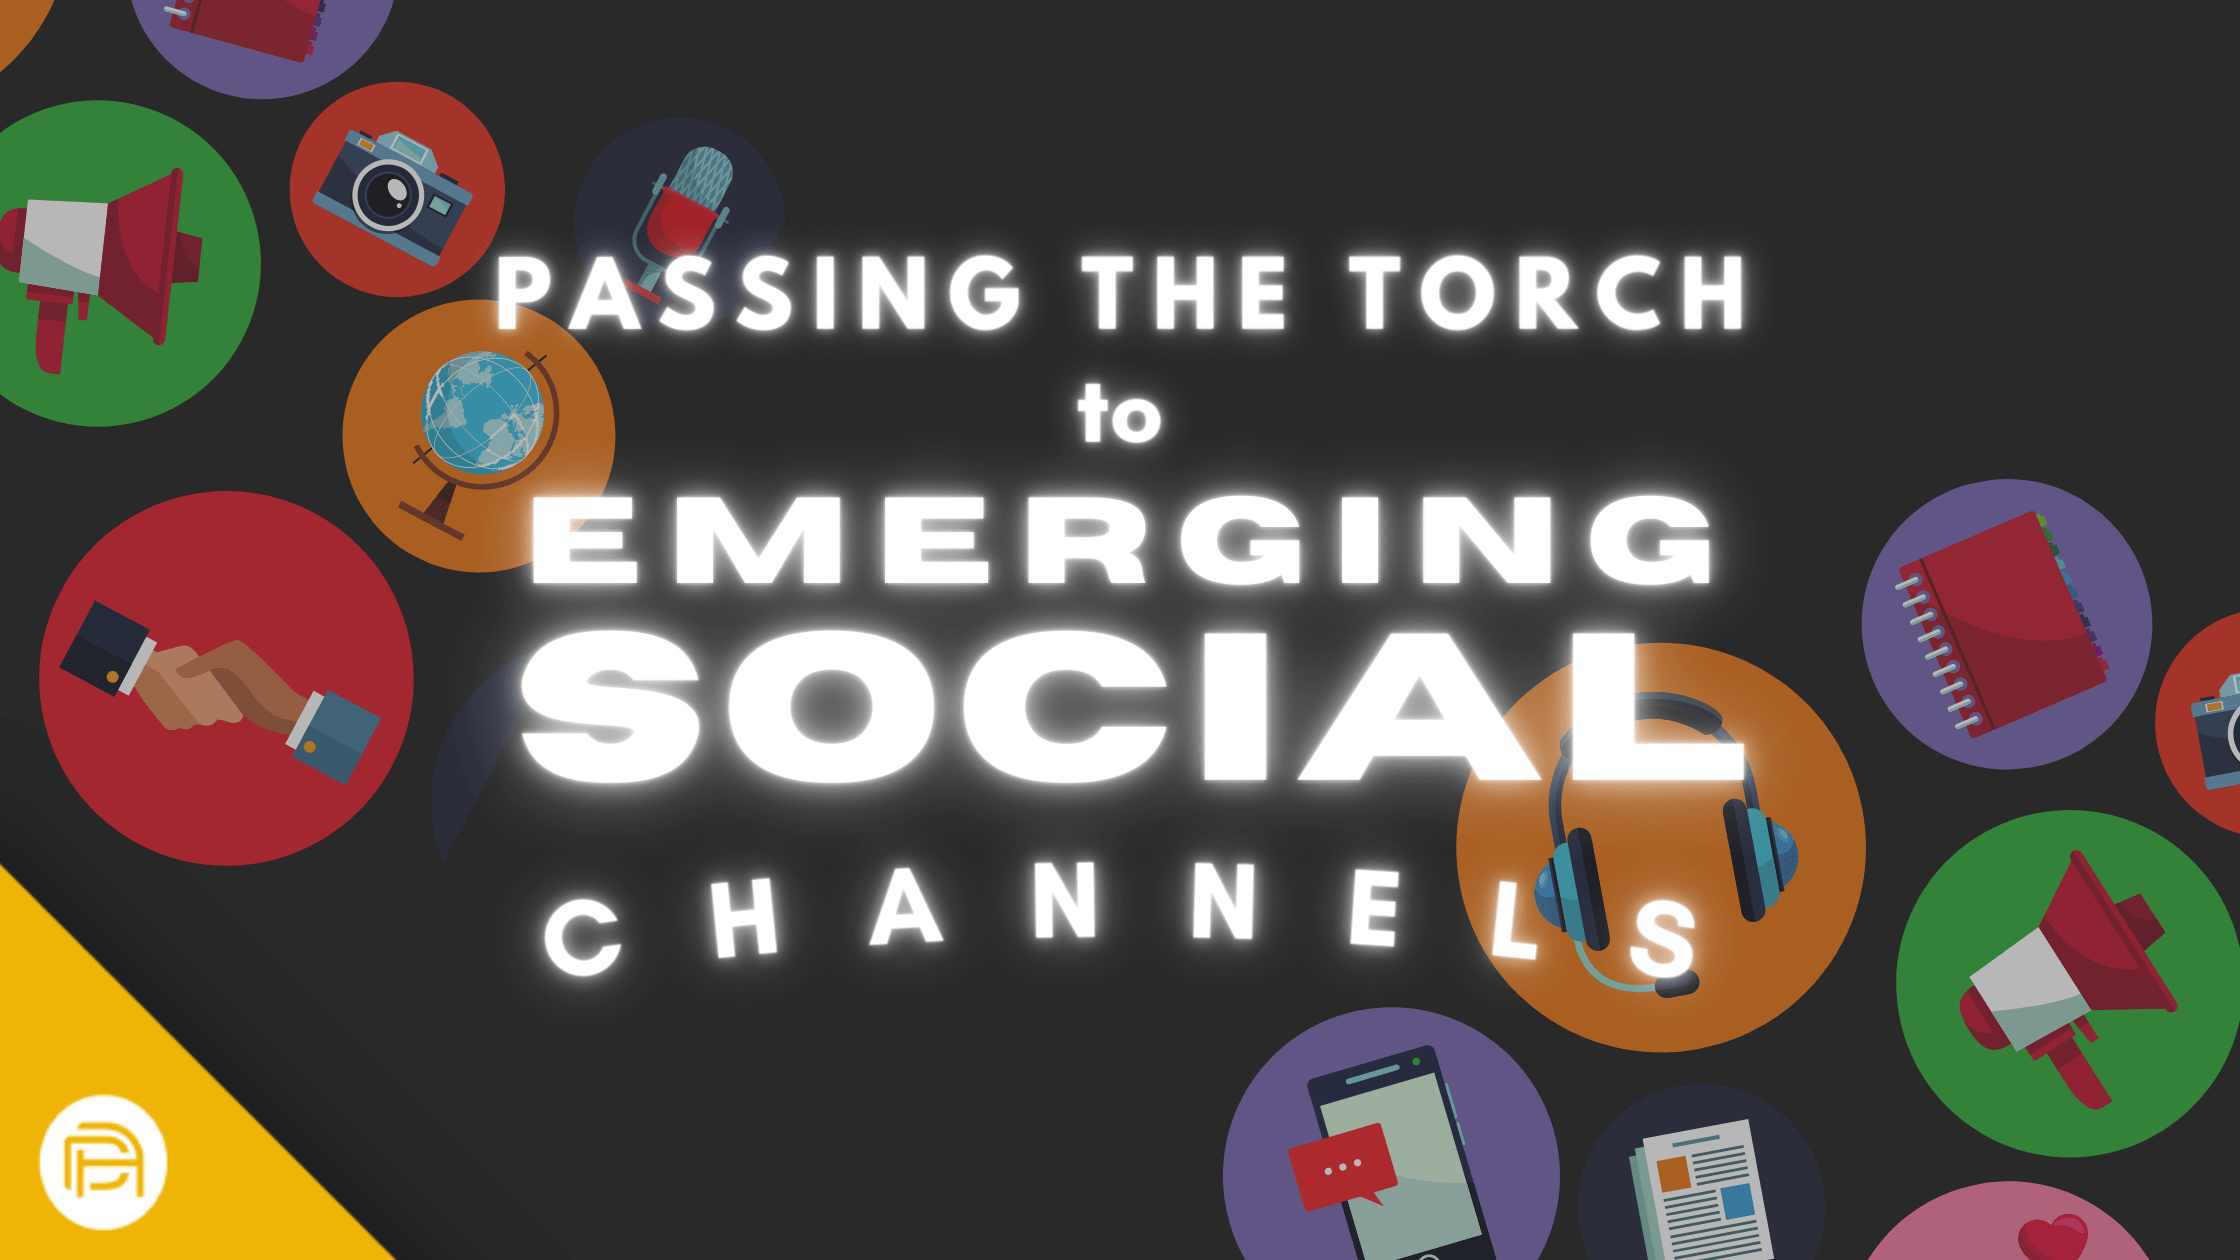 Passing The Torch to Emerging Social Channels